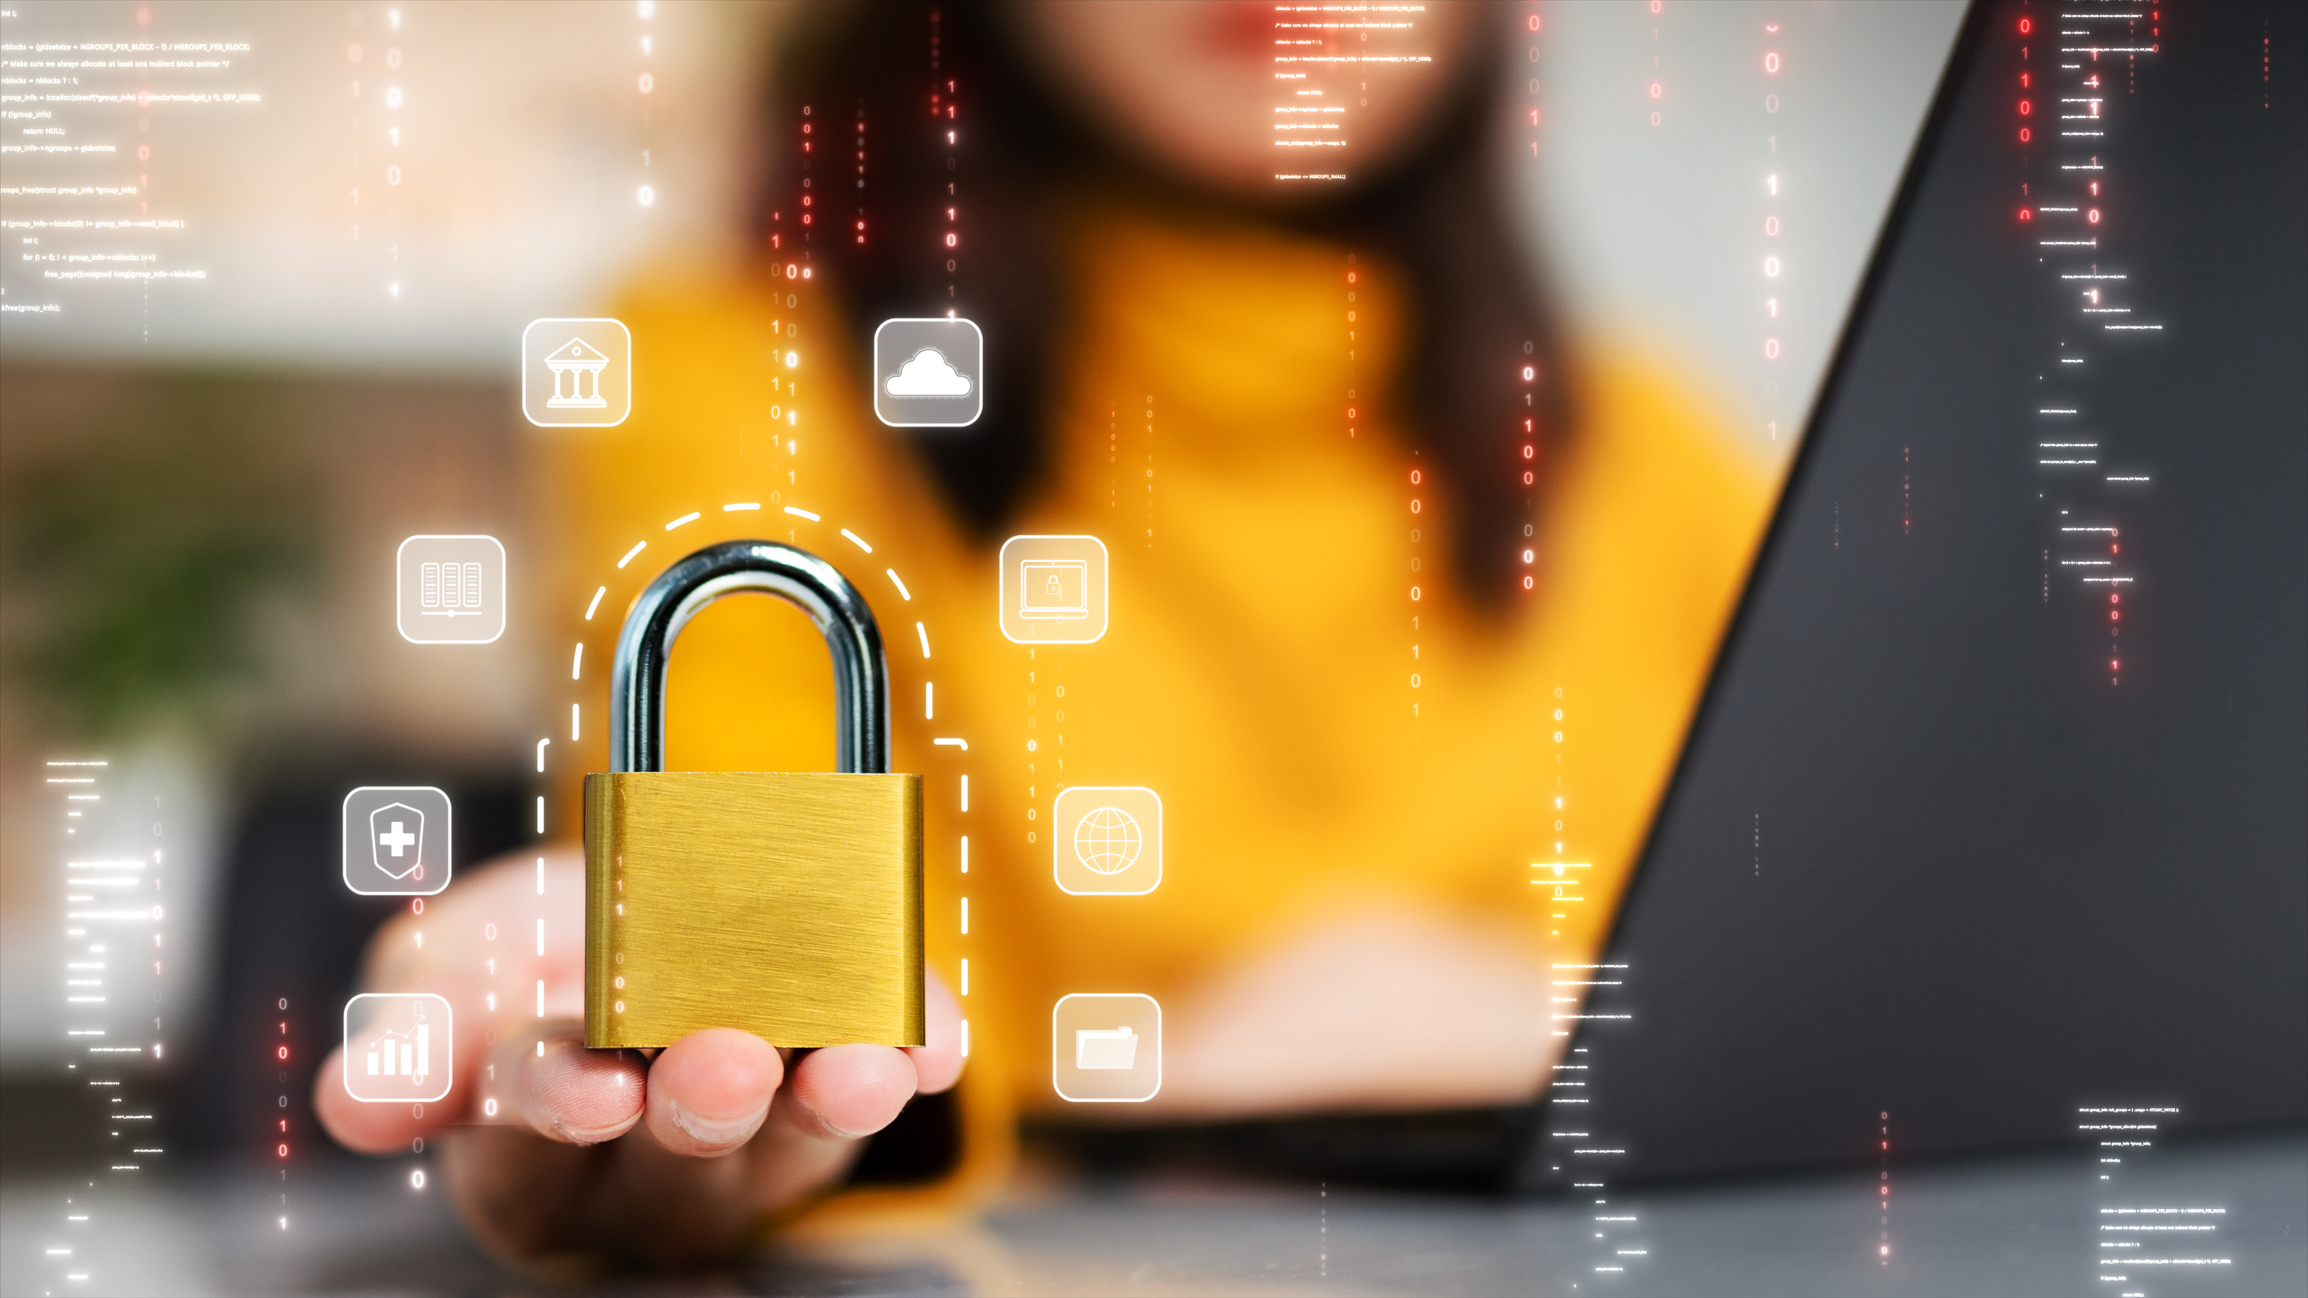 Cyber security protection concept of digital technology. Person holding a locked padlock surrounded by icons representing security To login to the internet transaction.